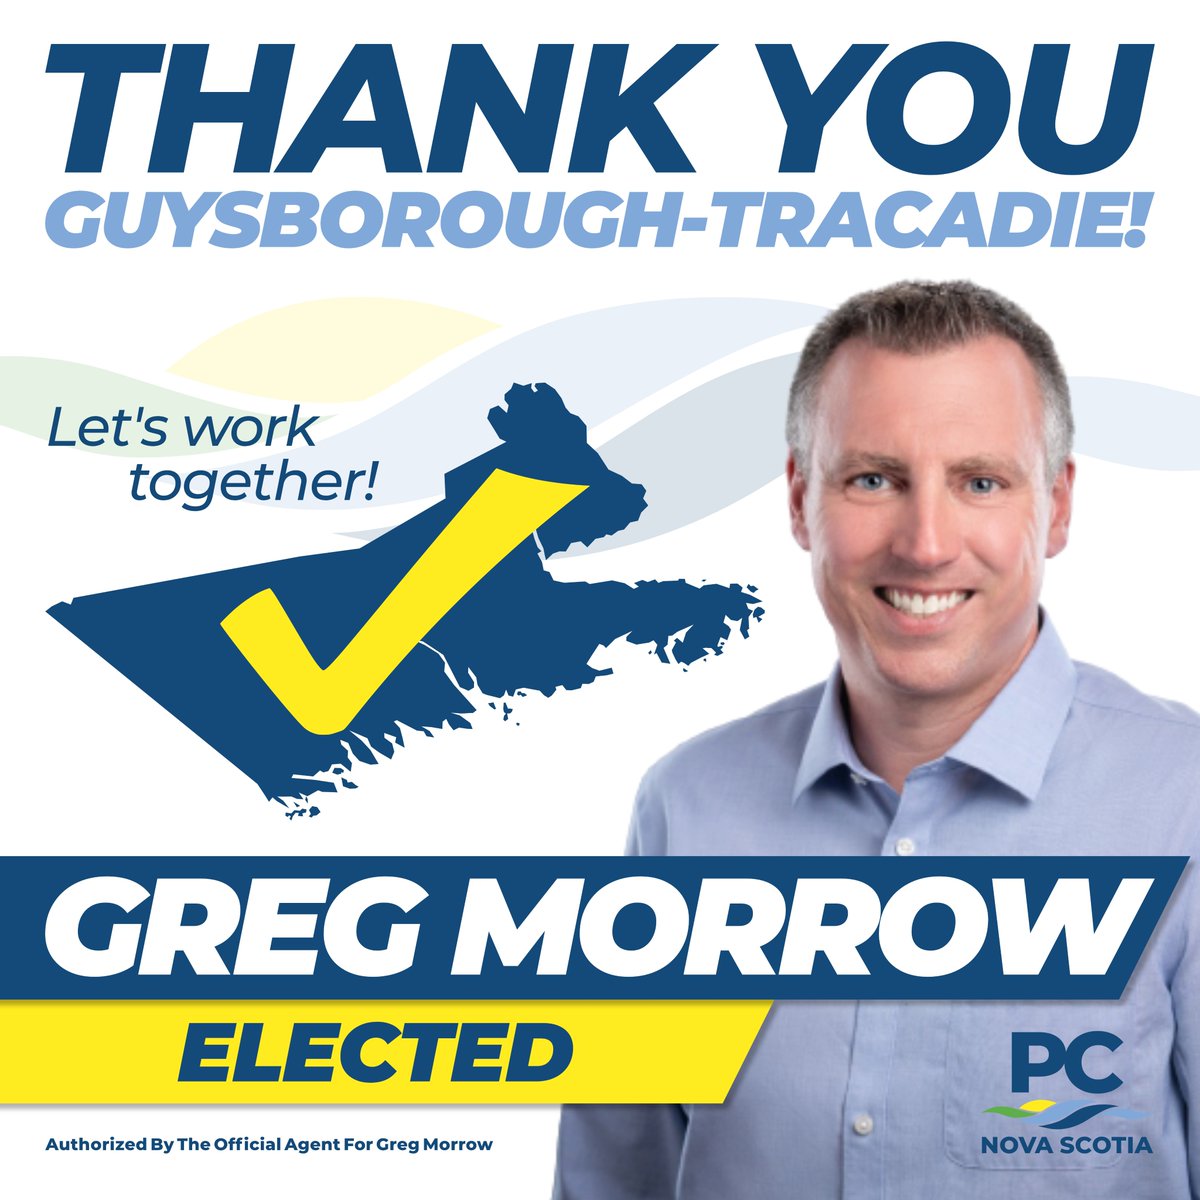 Thank you Guysborough-Tracadie! I am truly humbled to be elected as your next MLA!